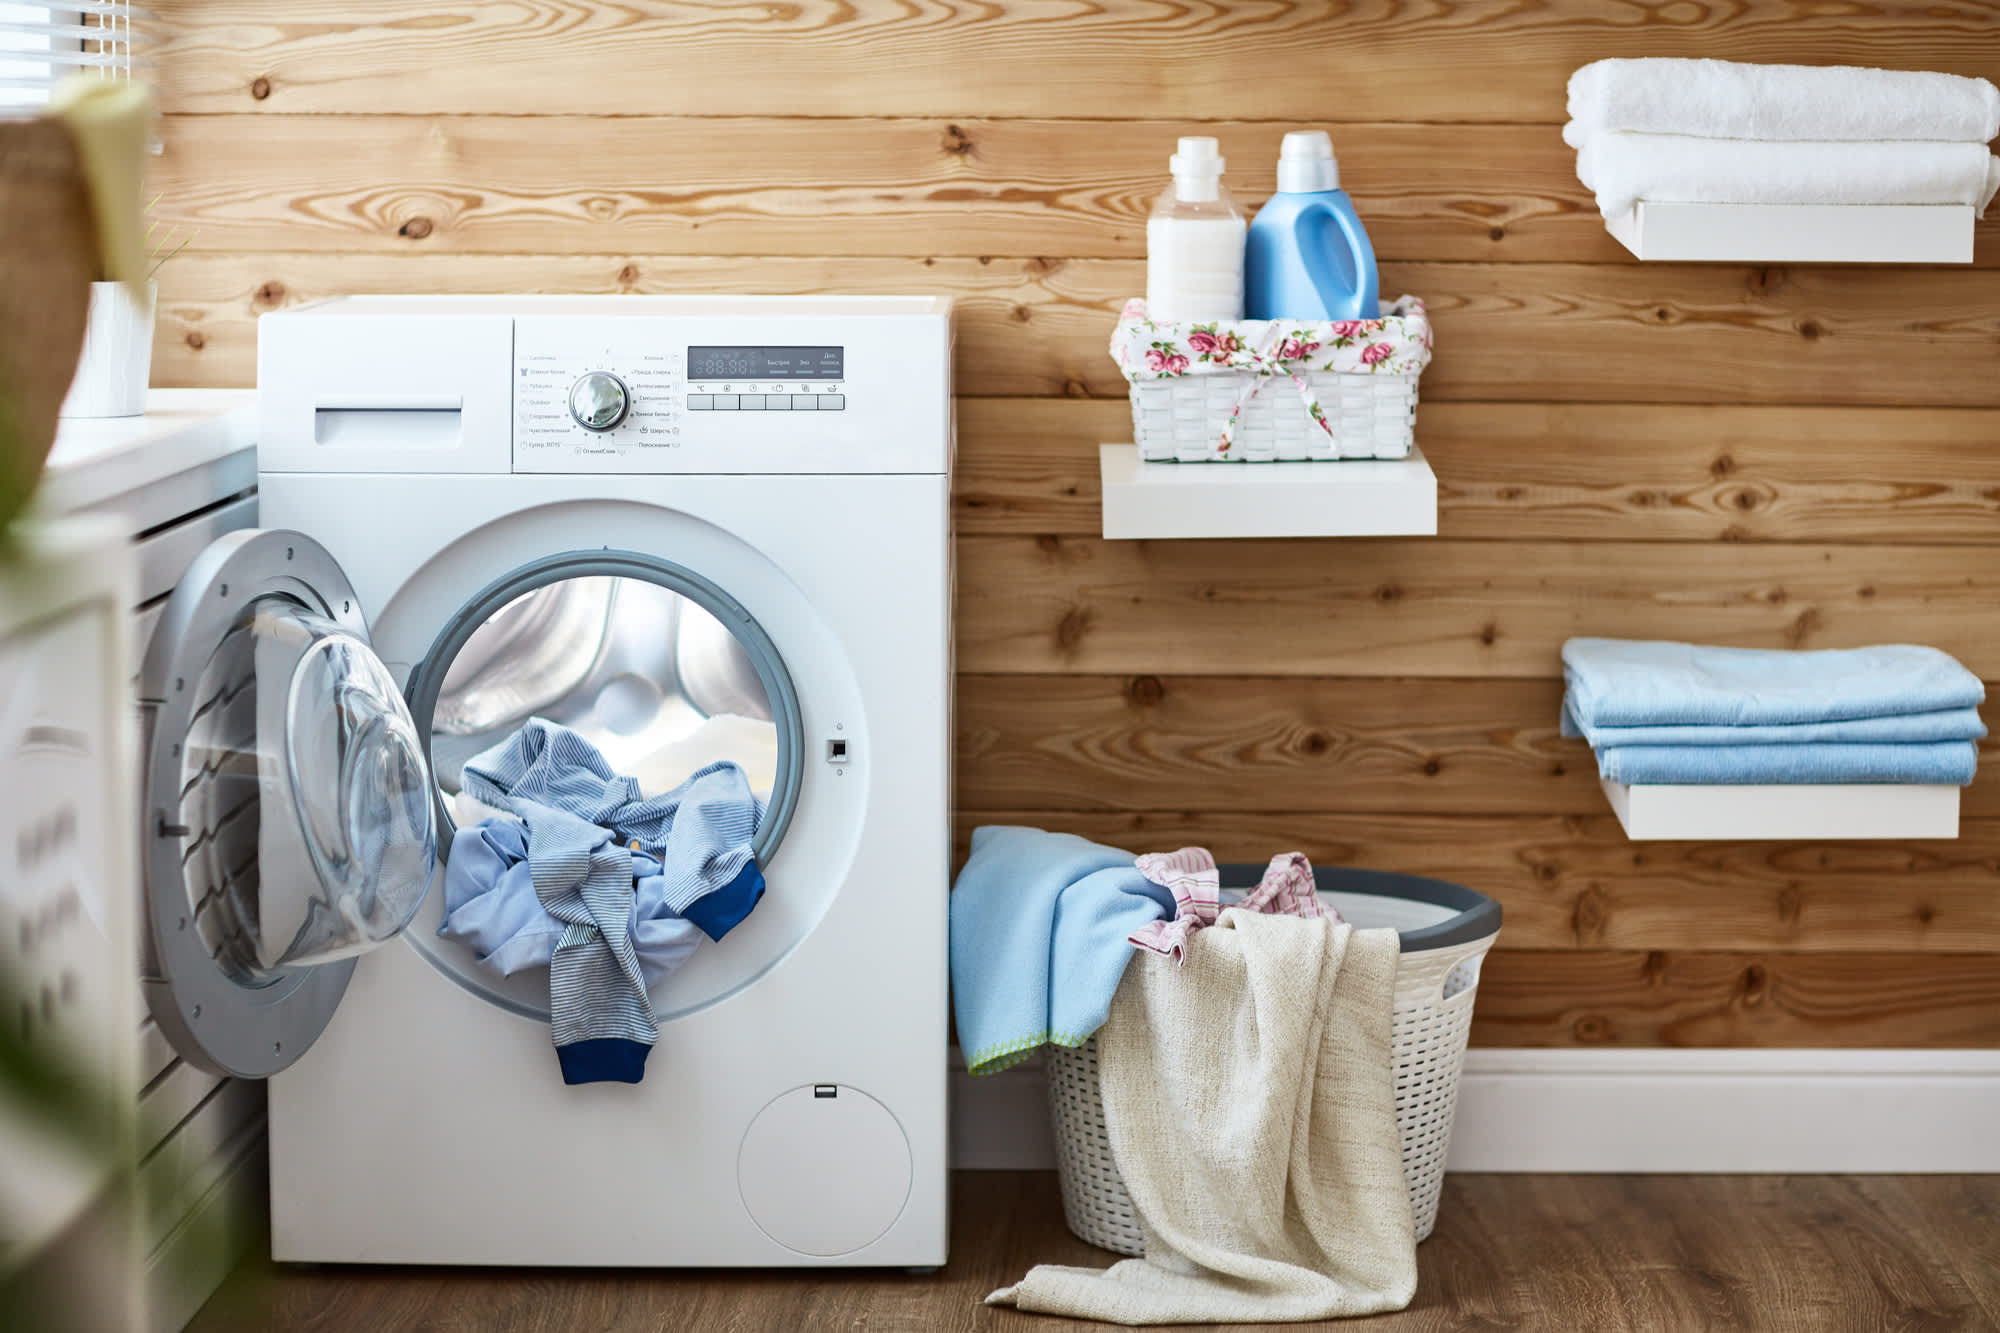 Is It Ever Okay To Leave Your Wet Laundry In The Washer Overnight?